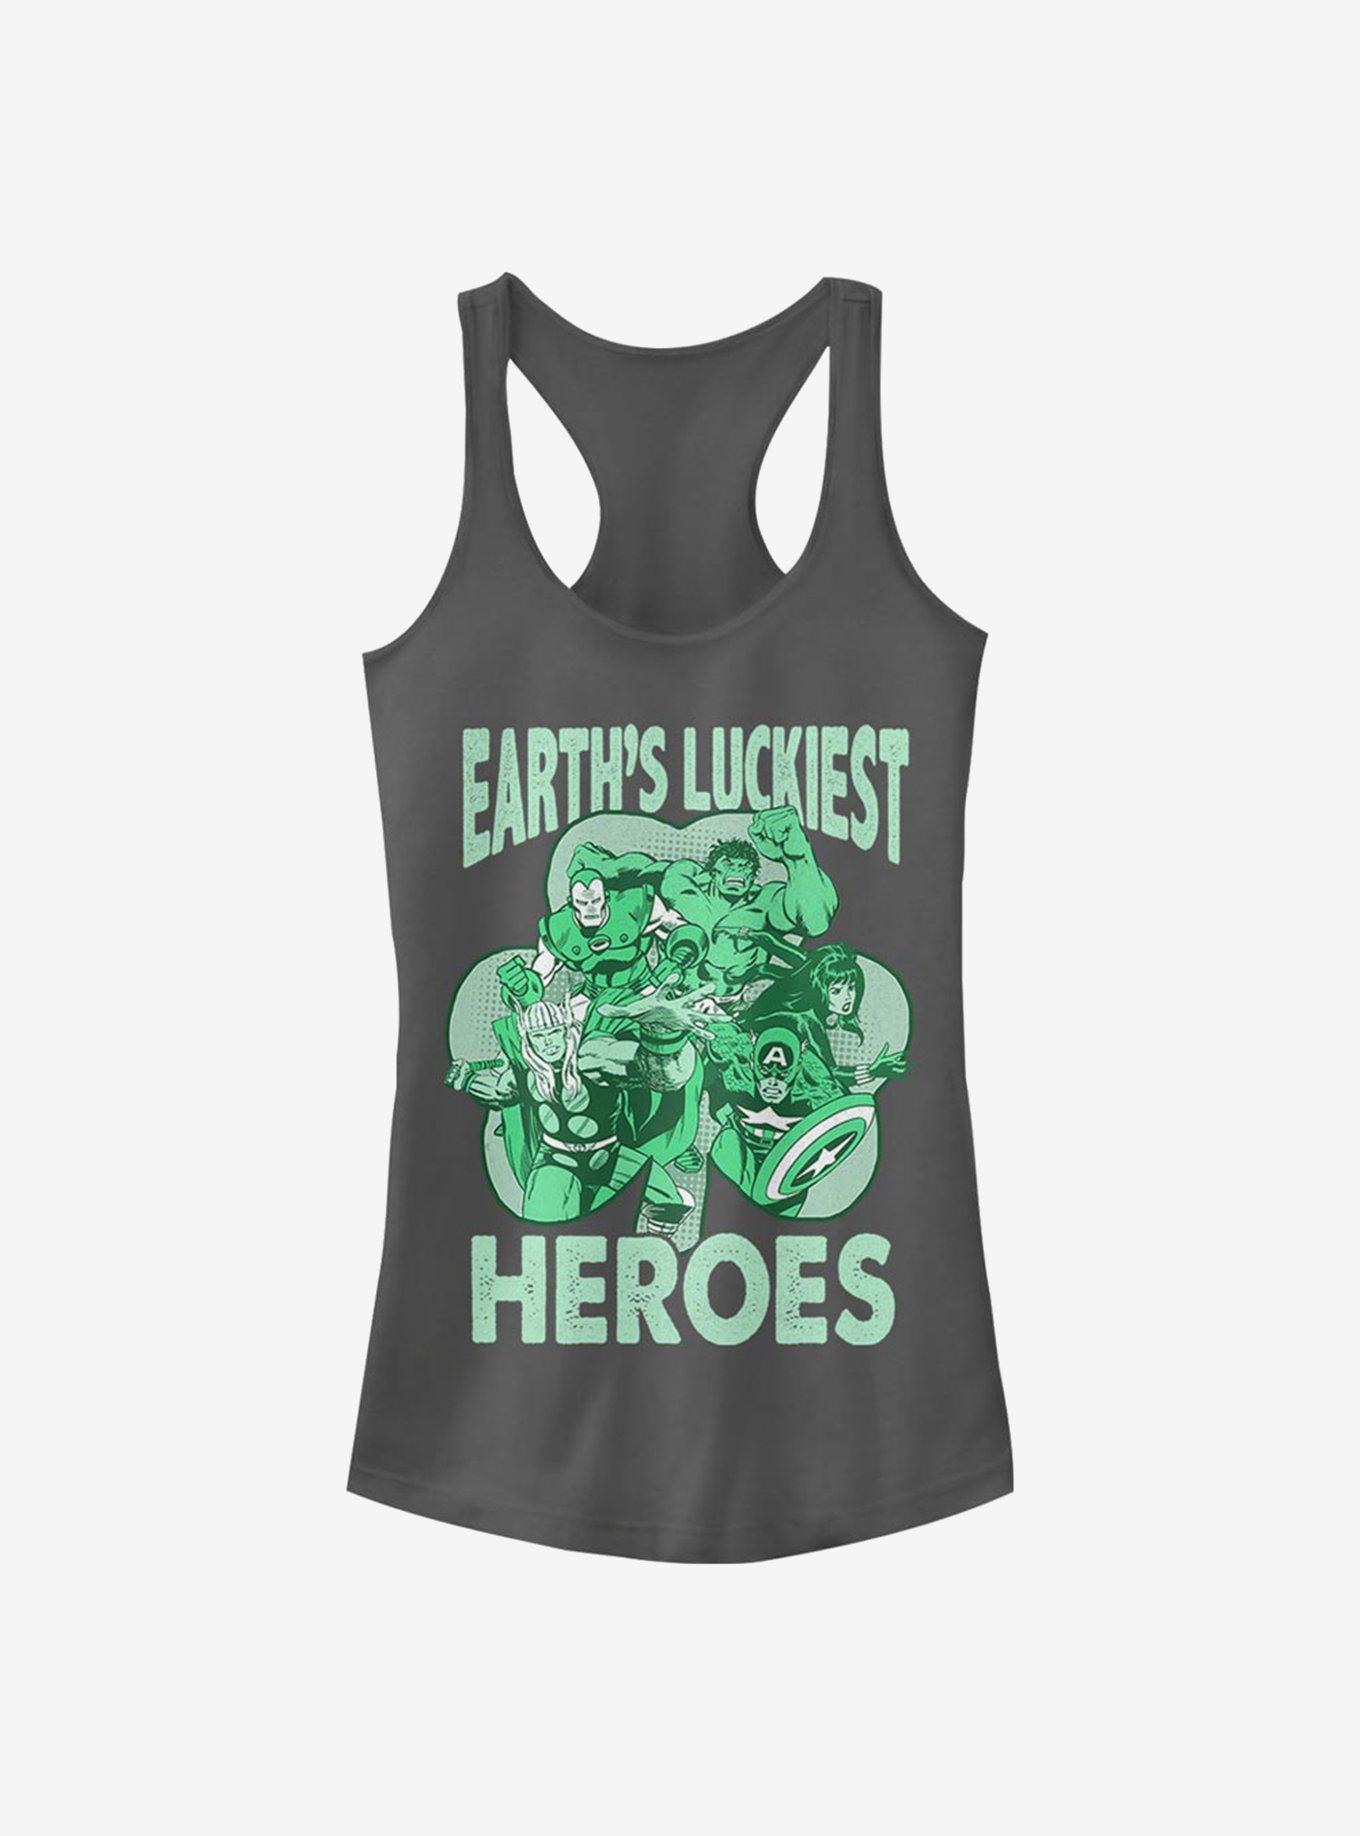 Marvel Avengers Earth's Luckiest Heroes Girls Tank, CHARCOAL, hi-res